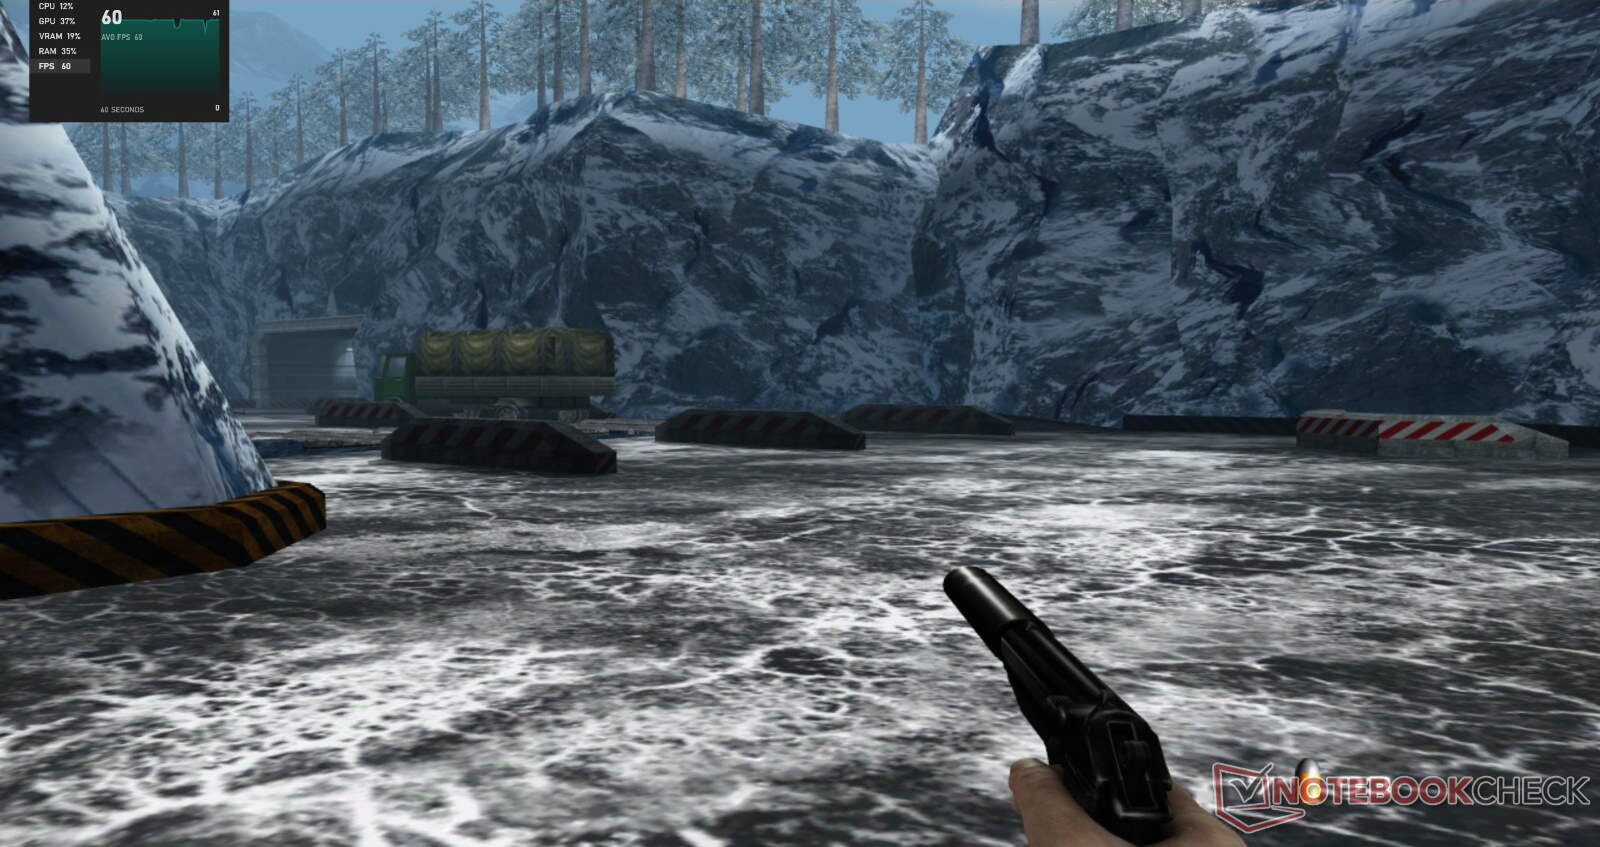 Gameplay Footage Of The Cancelled Goldeneye 007 Remaster Has Leaked